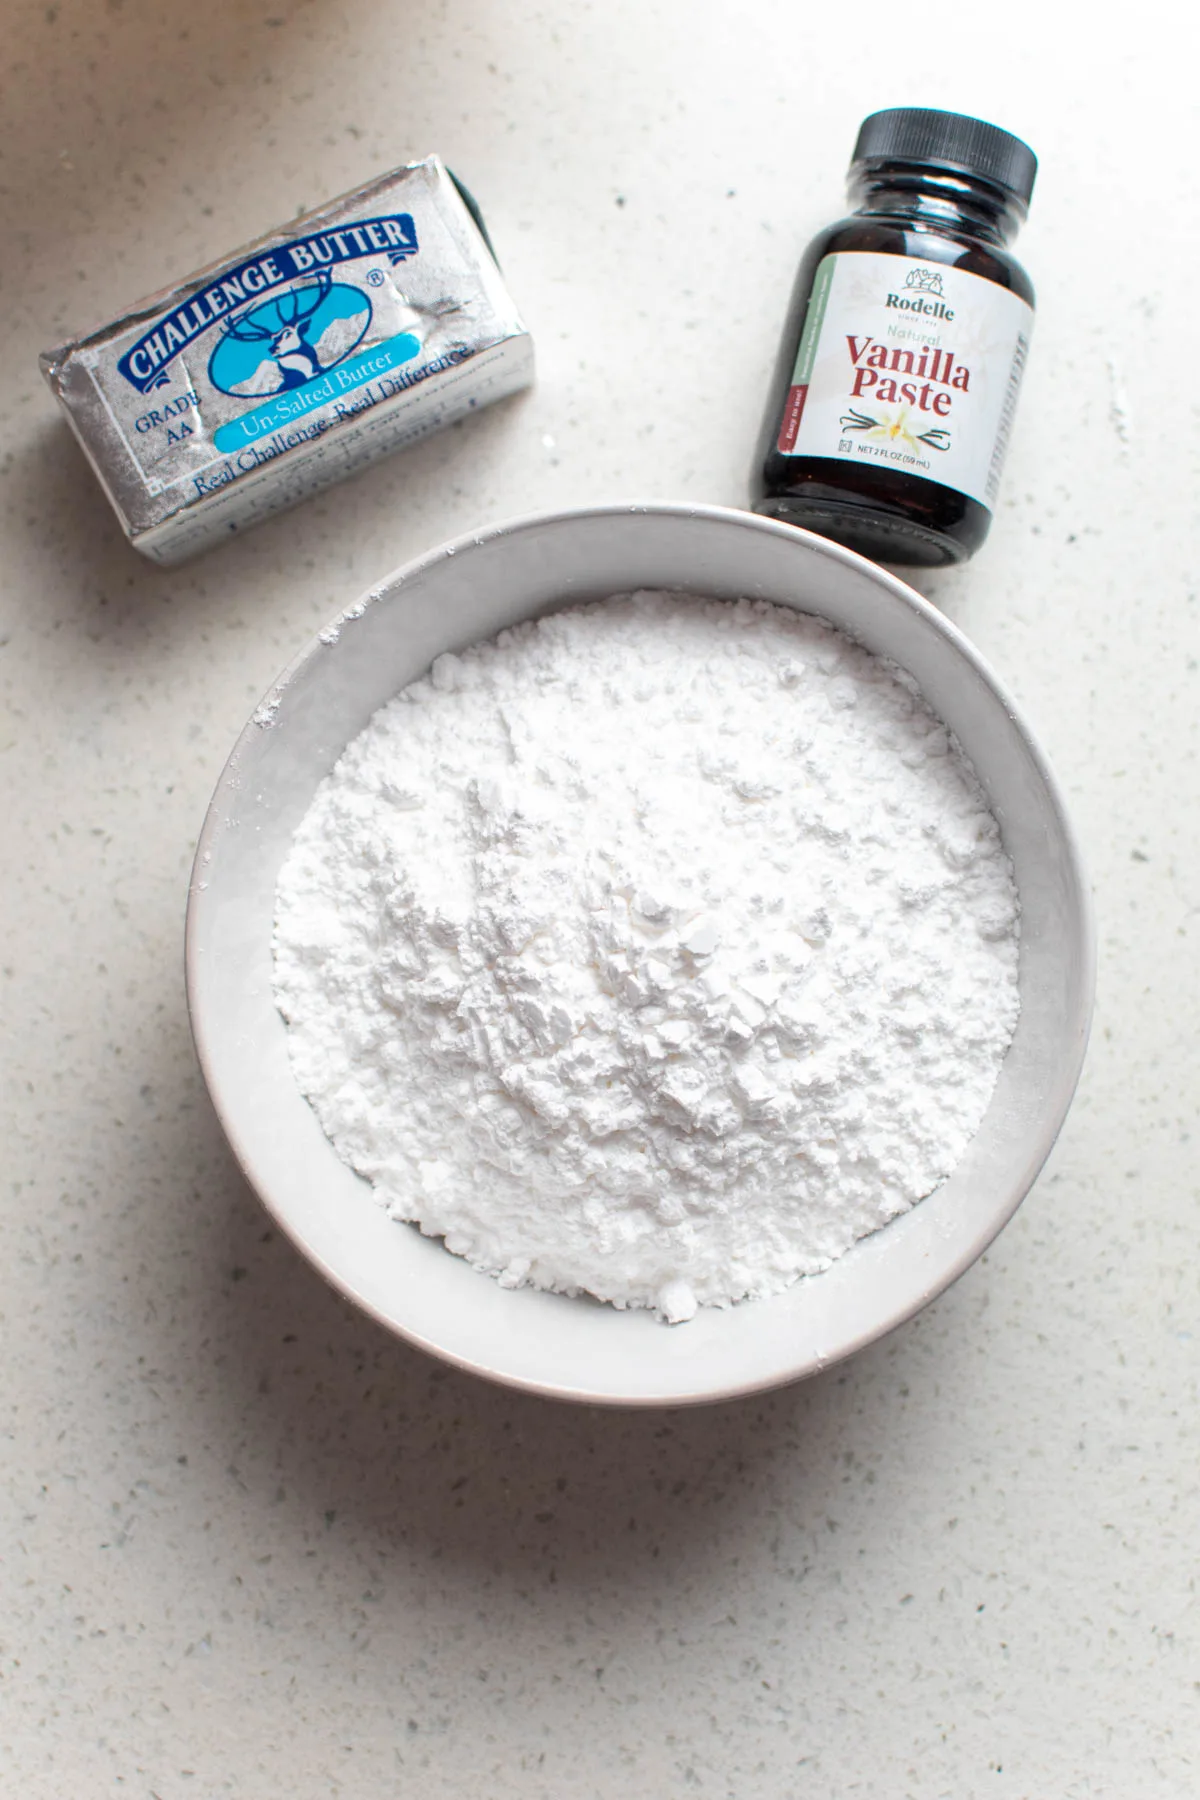 Frosting ingredients on countertop including powdered sugar, butter, and vanilla paste.